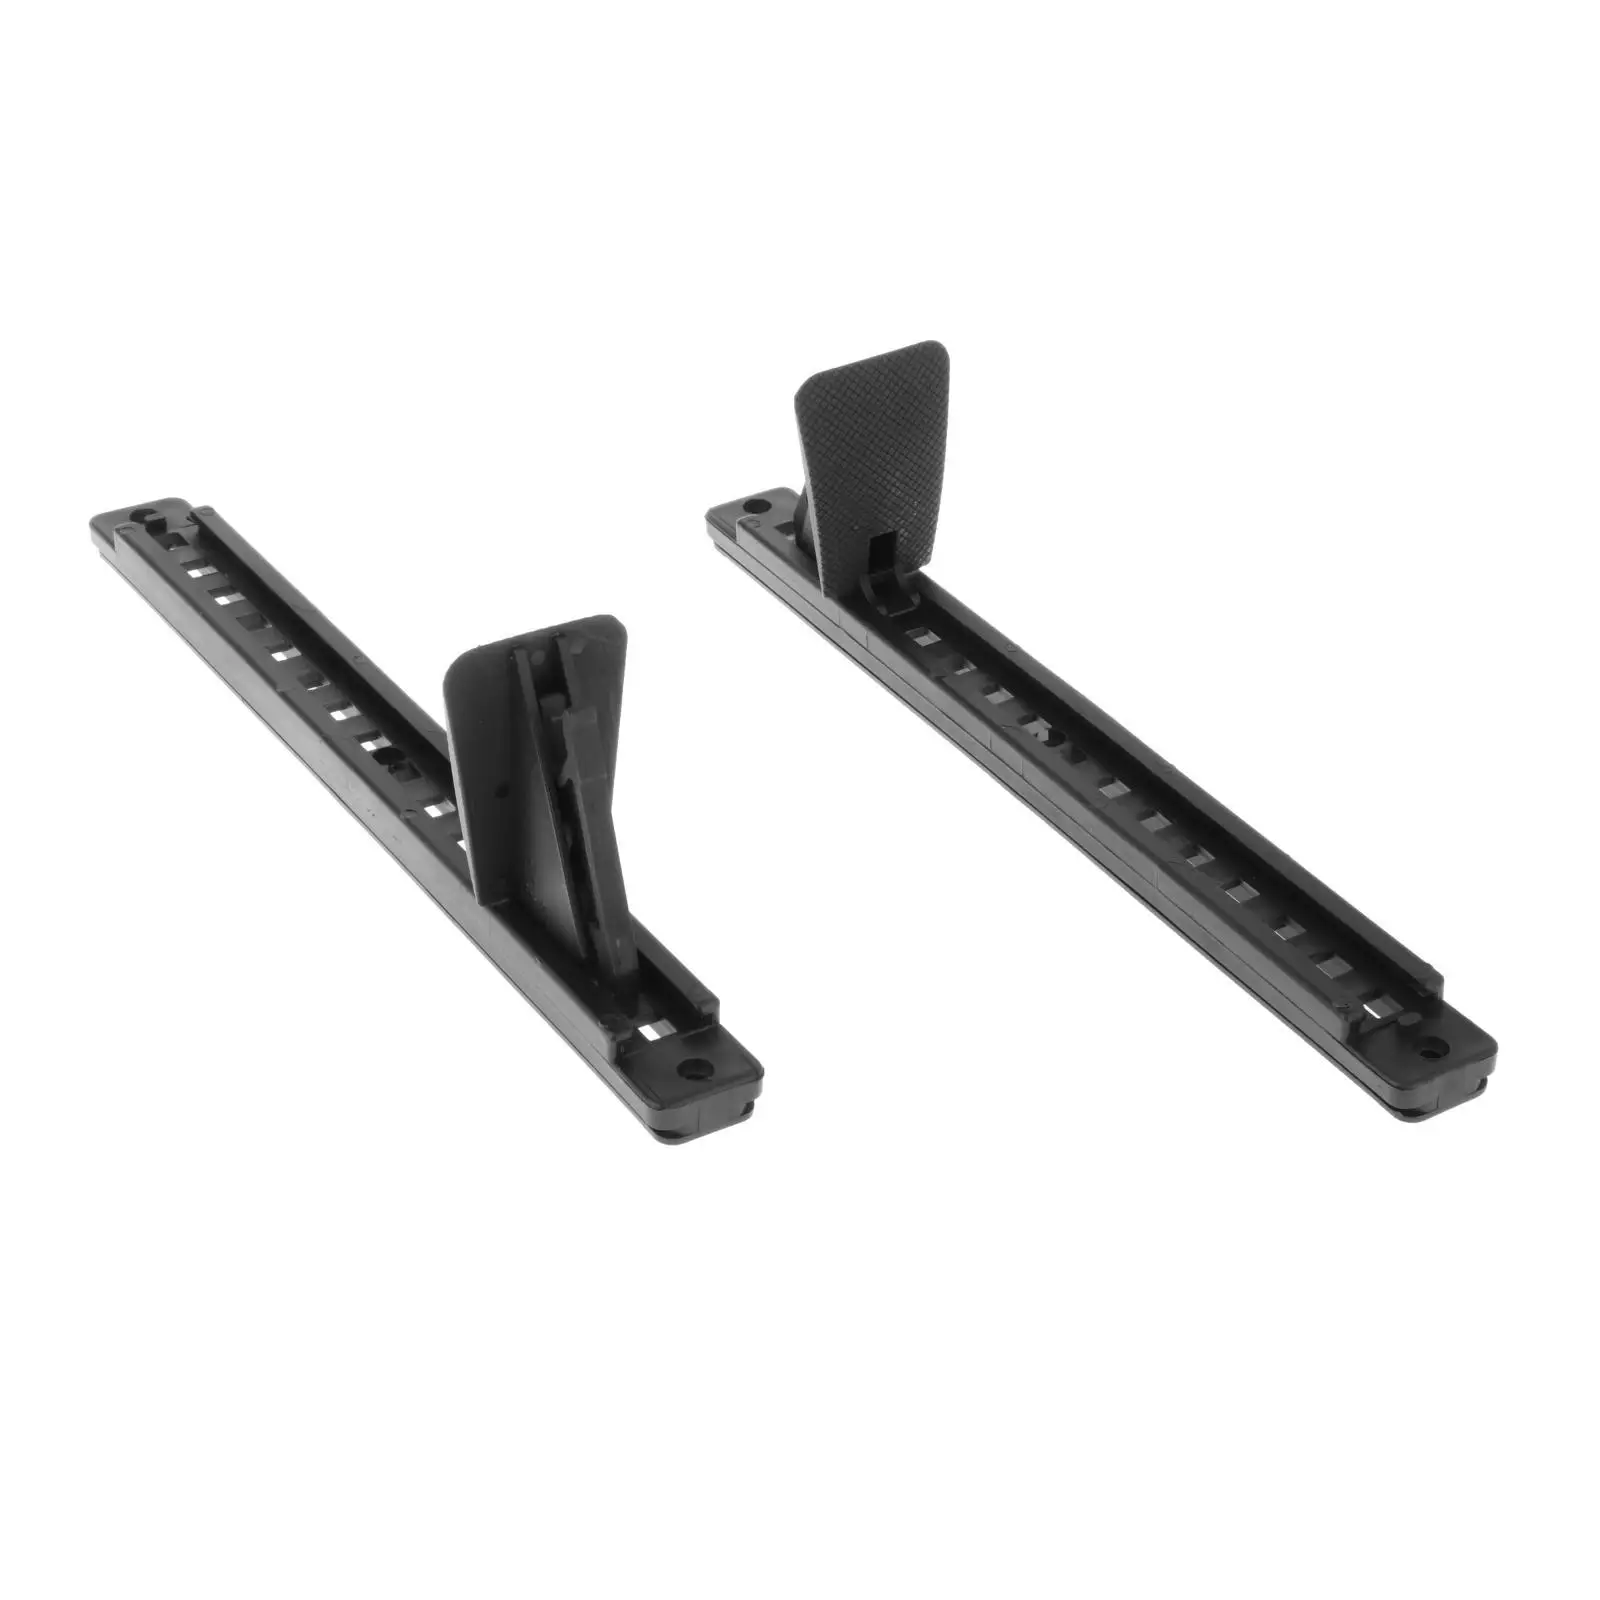 Kayak Foot Pegs Black Finish Kayak Accessories 15 Inches Universal Footrest